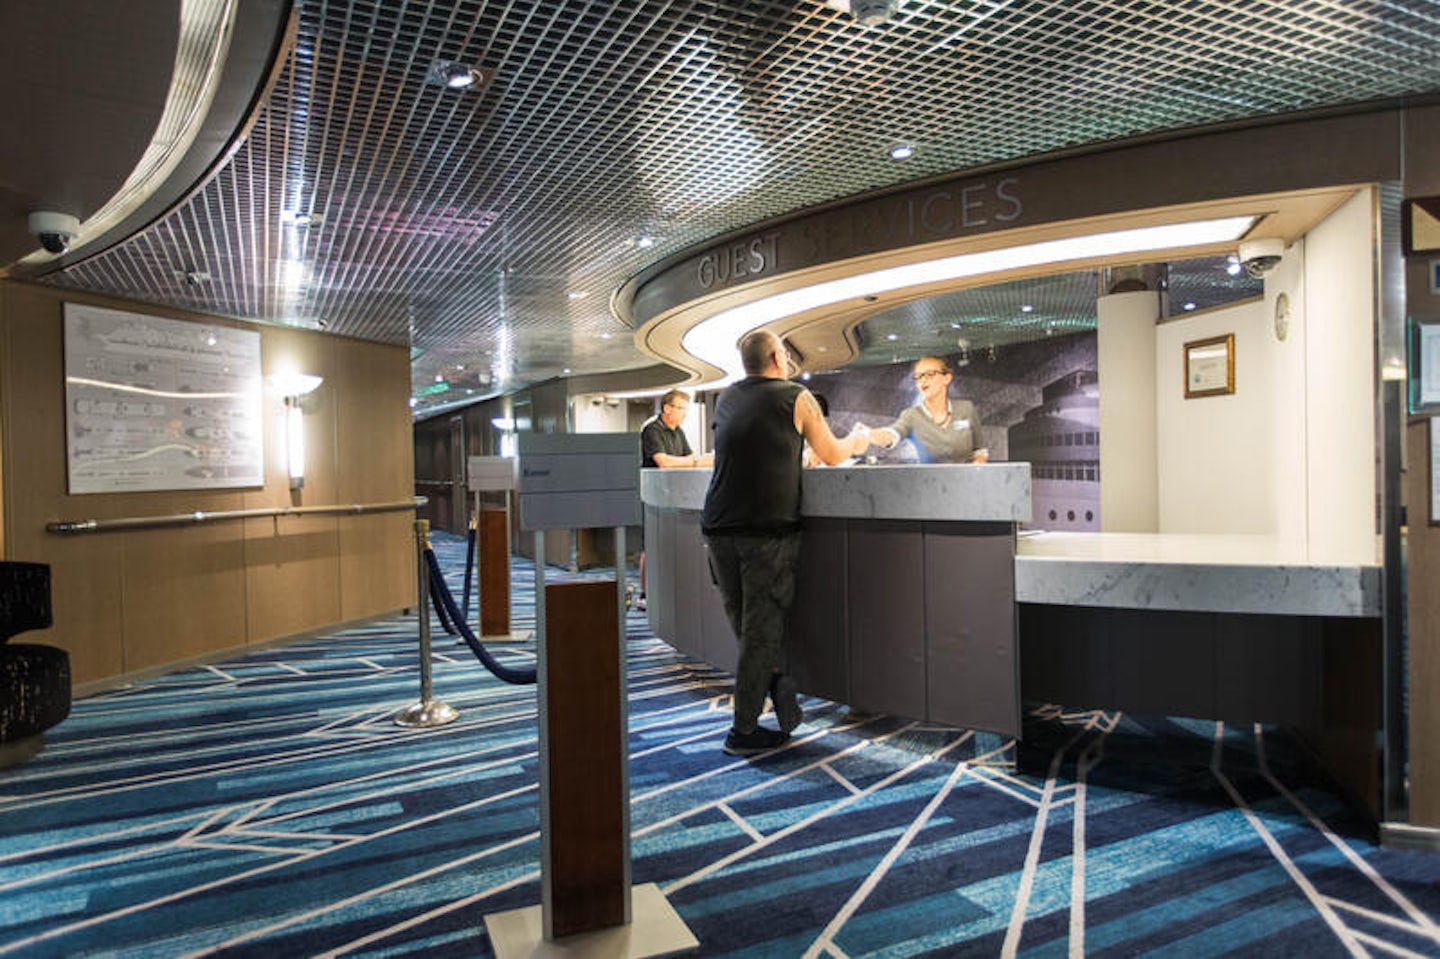 Guest Services on Nieuw Amsterdam